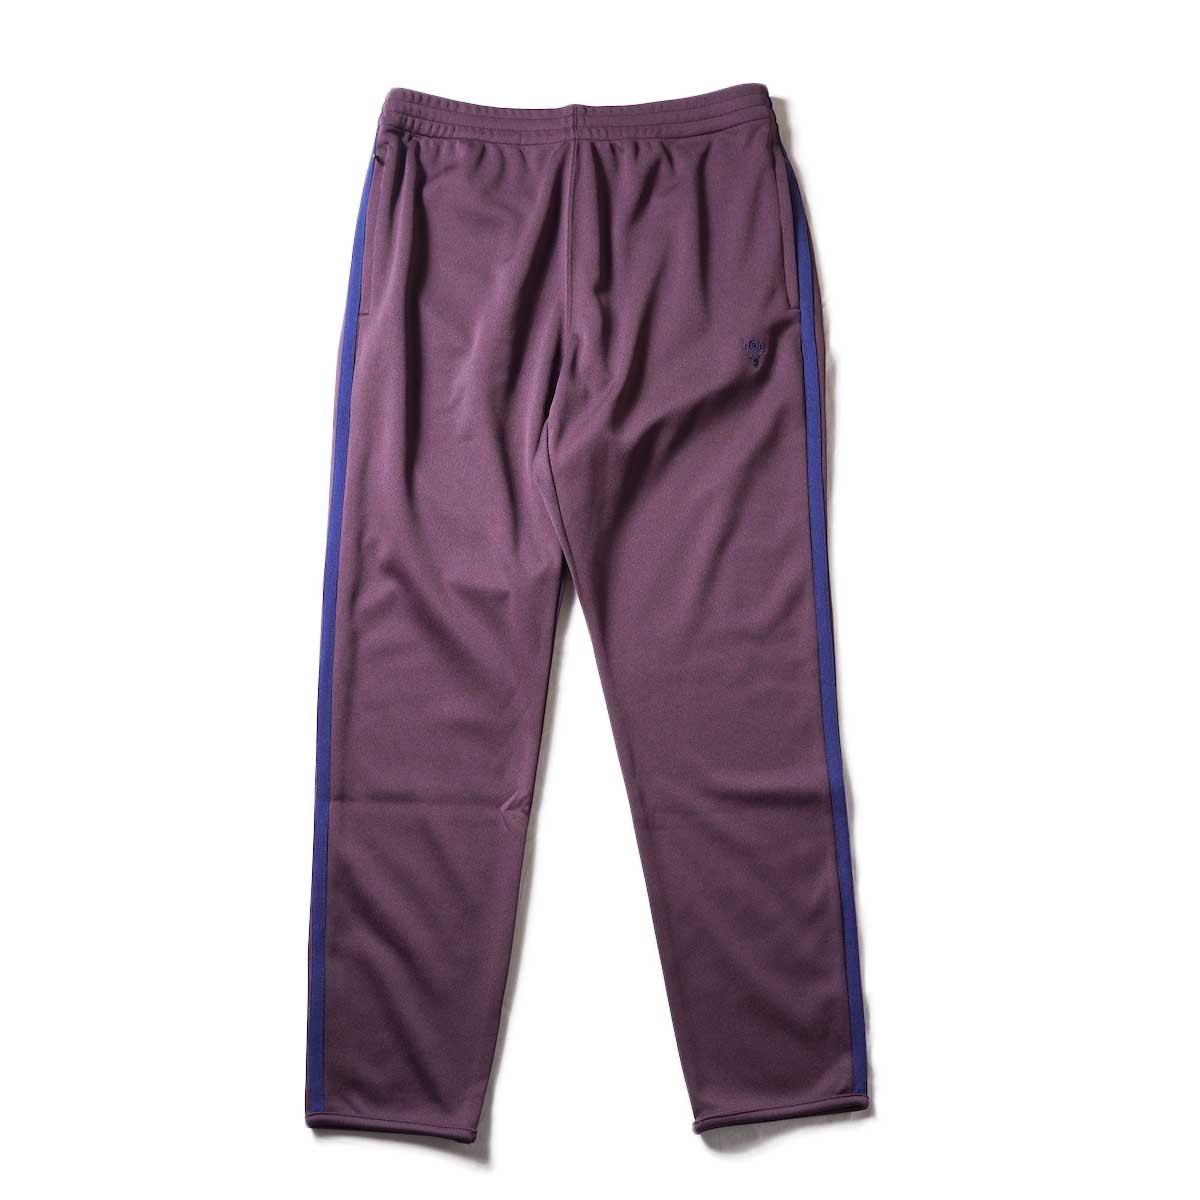 South2 West8 / Trainer Pants - Poly Smooth (Burgundy)